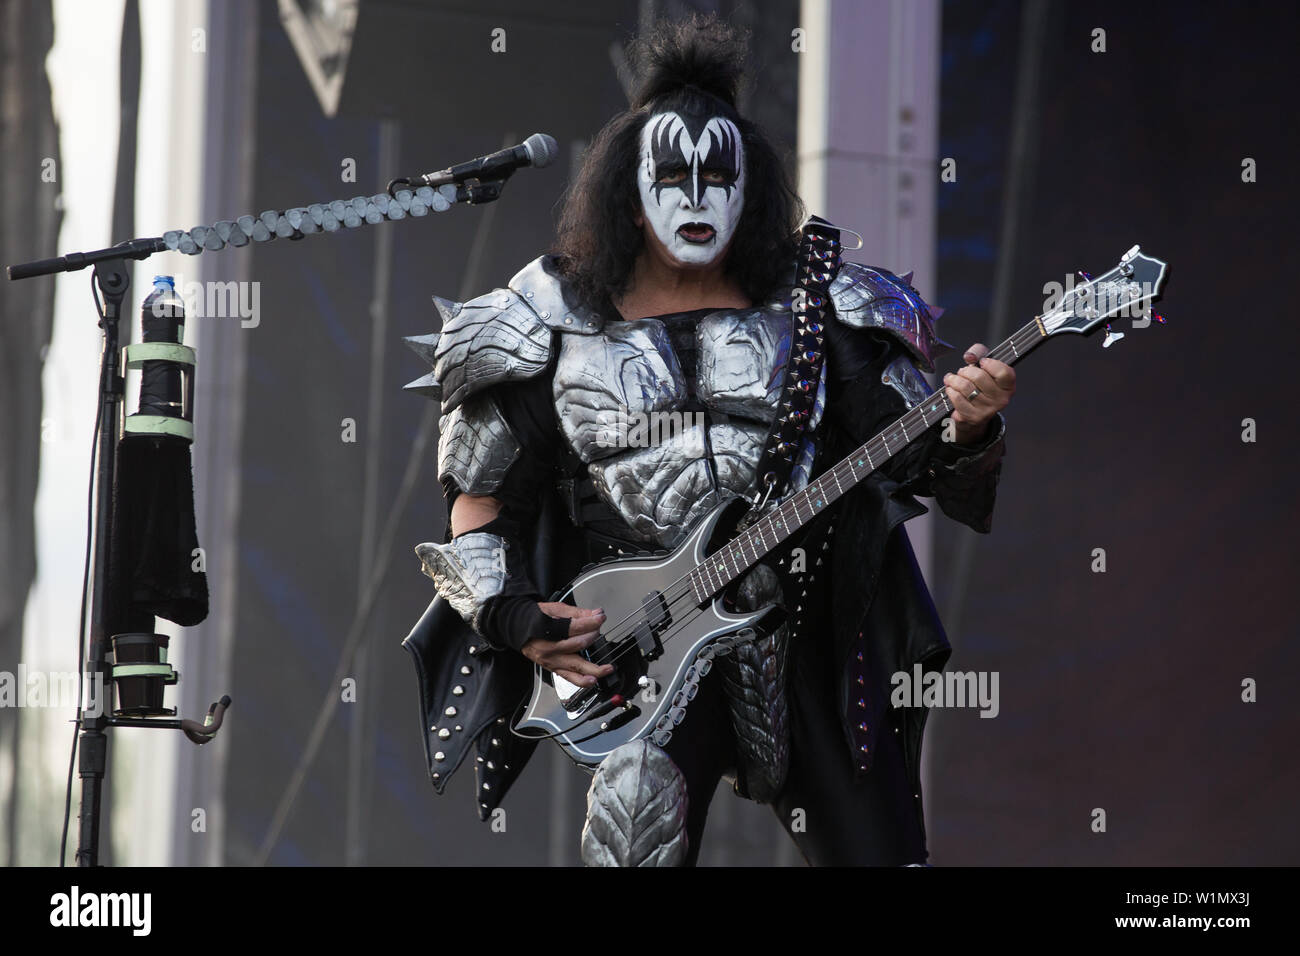 Oslo, Norway - June 27, 2019. The American rock band Kiss performs a live concert during the Norwegian music festival Tons of Rock 2019 in Oslo. Here vocalist and bass player Gene Simmons seen live on stage. (Photo credit: Gonzales Photo - Per-Otto Oppi). Stock Photo